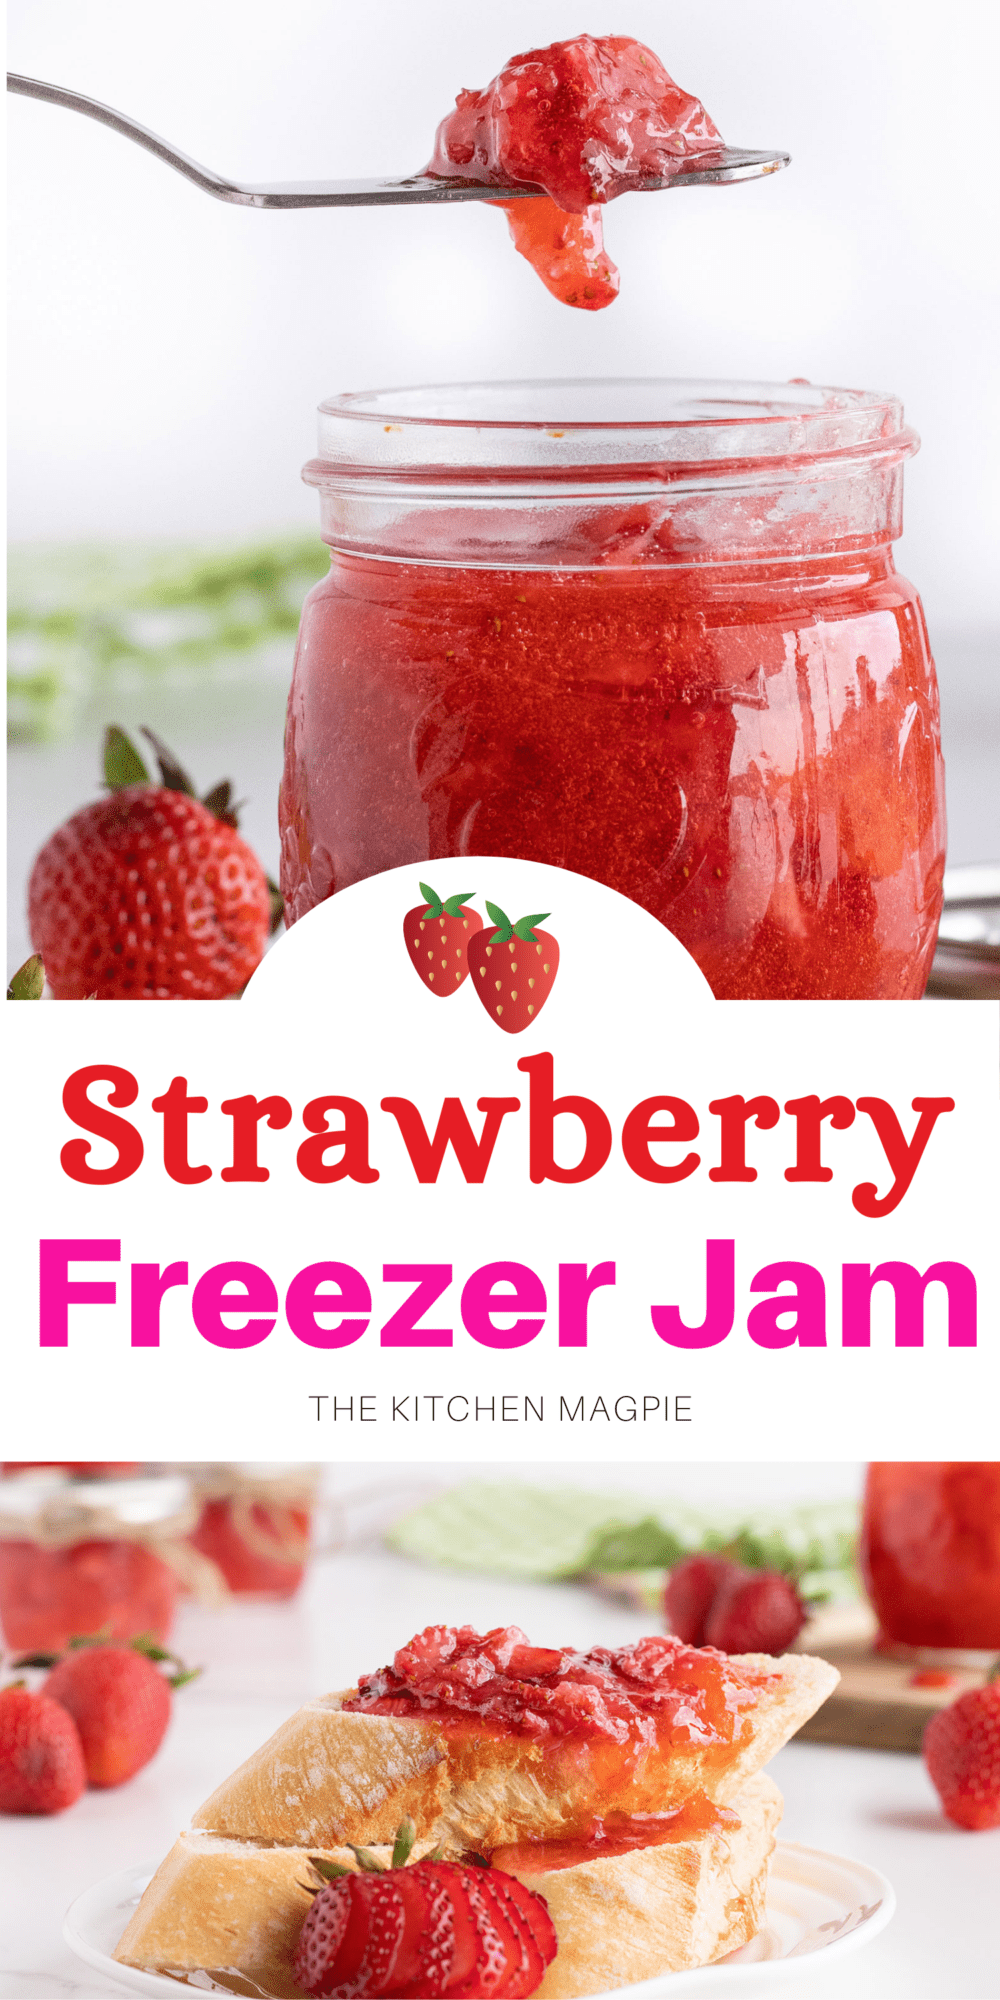 Strawberry Freezer Jam: The Ultimate Guide - Thriving Home